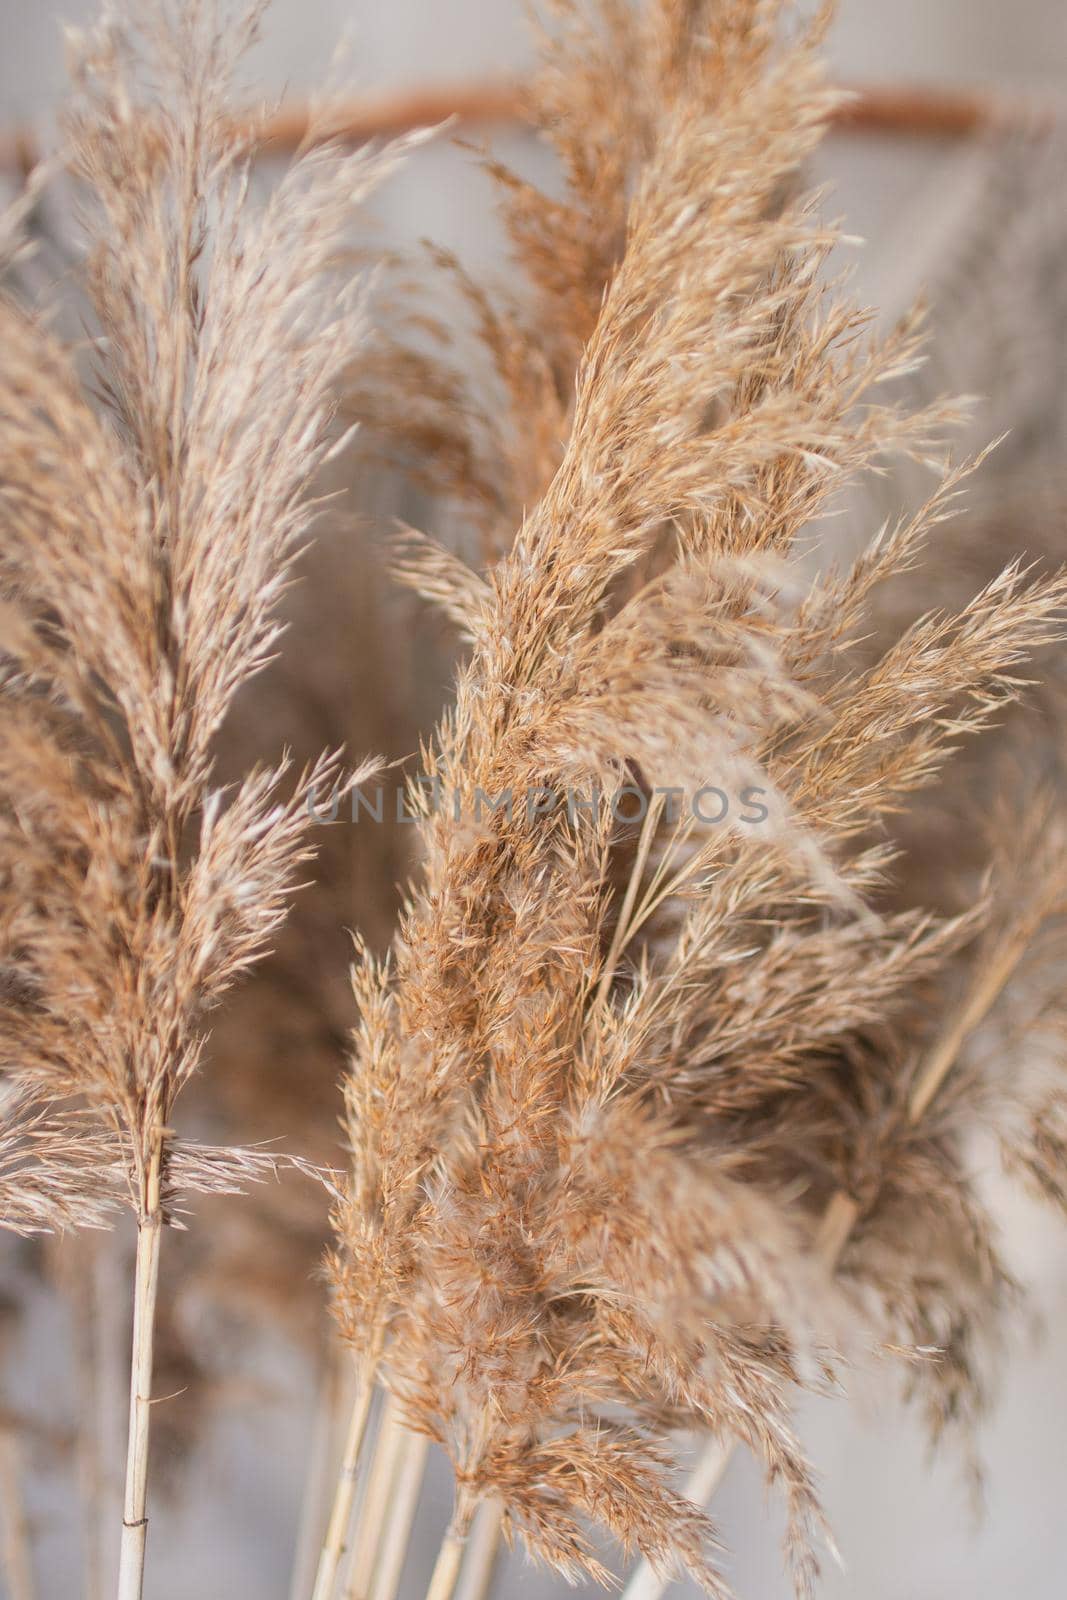 dry marsh plant reed macro photography with blur by ozornina